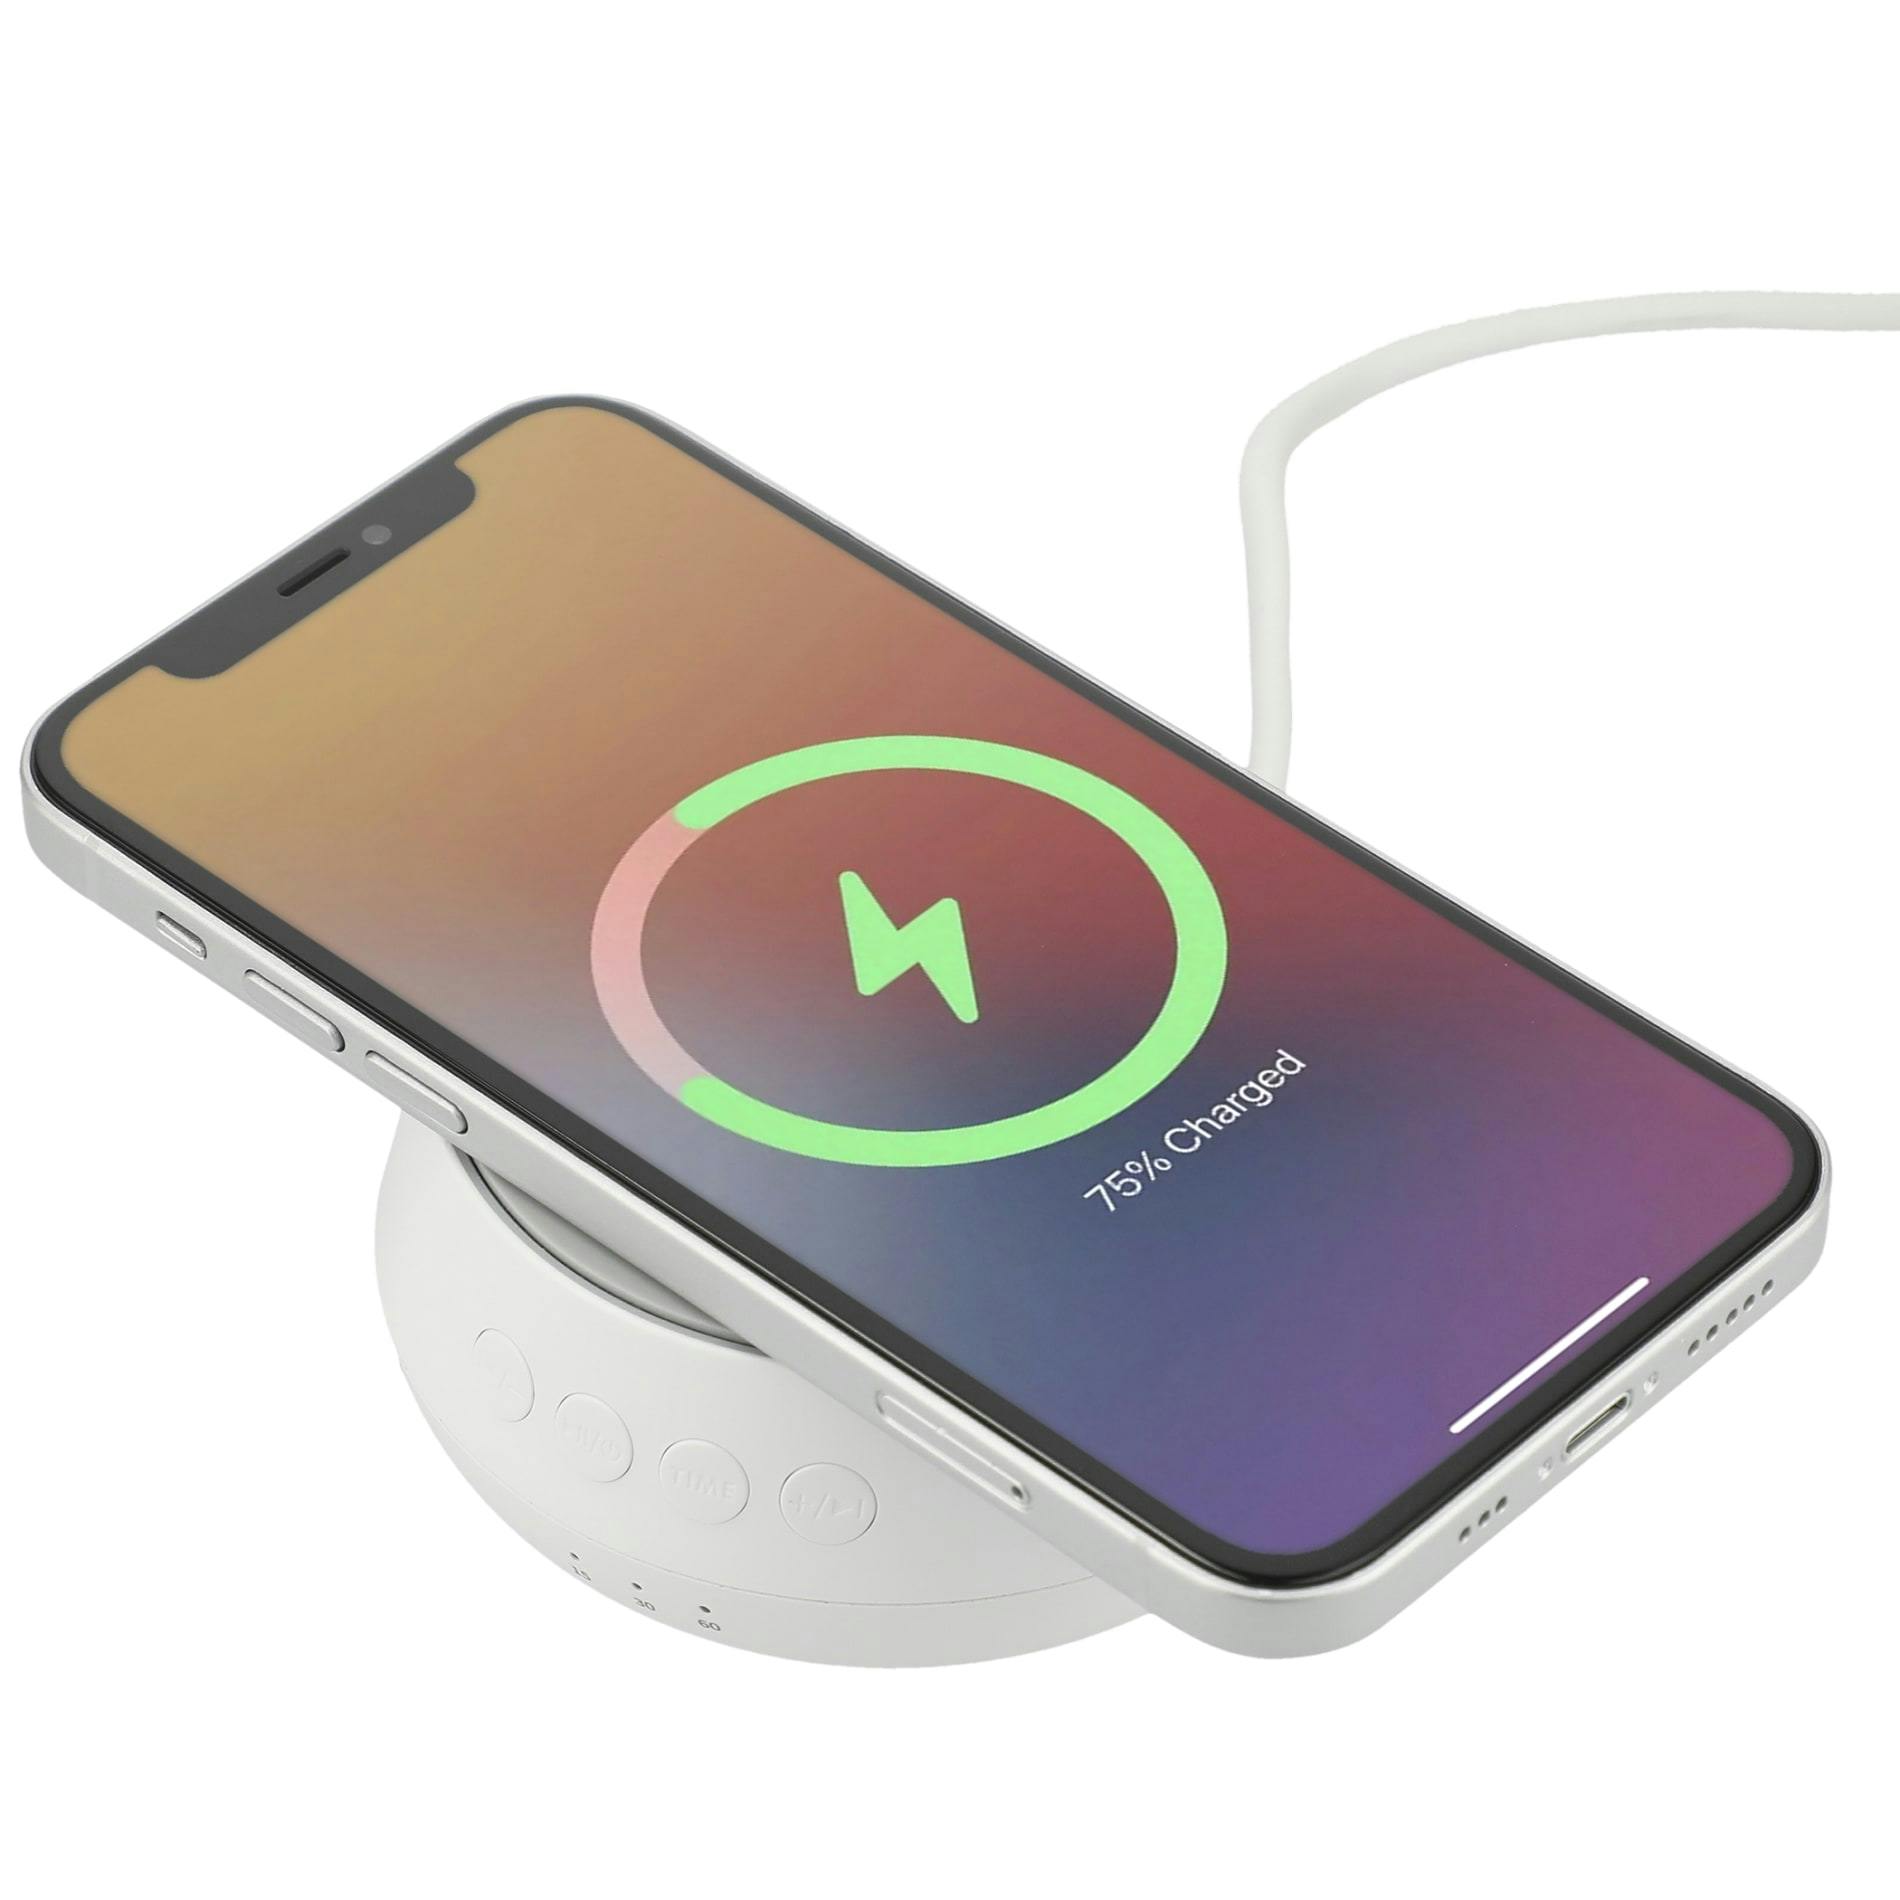 Sound Machine with Qi 15W Wireless Charger - additional Image 2